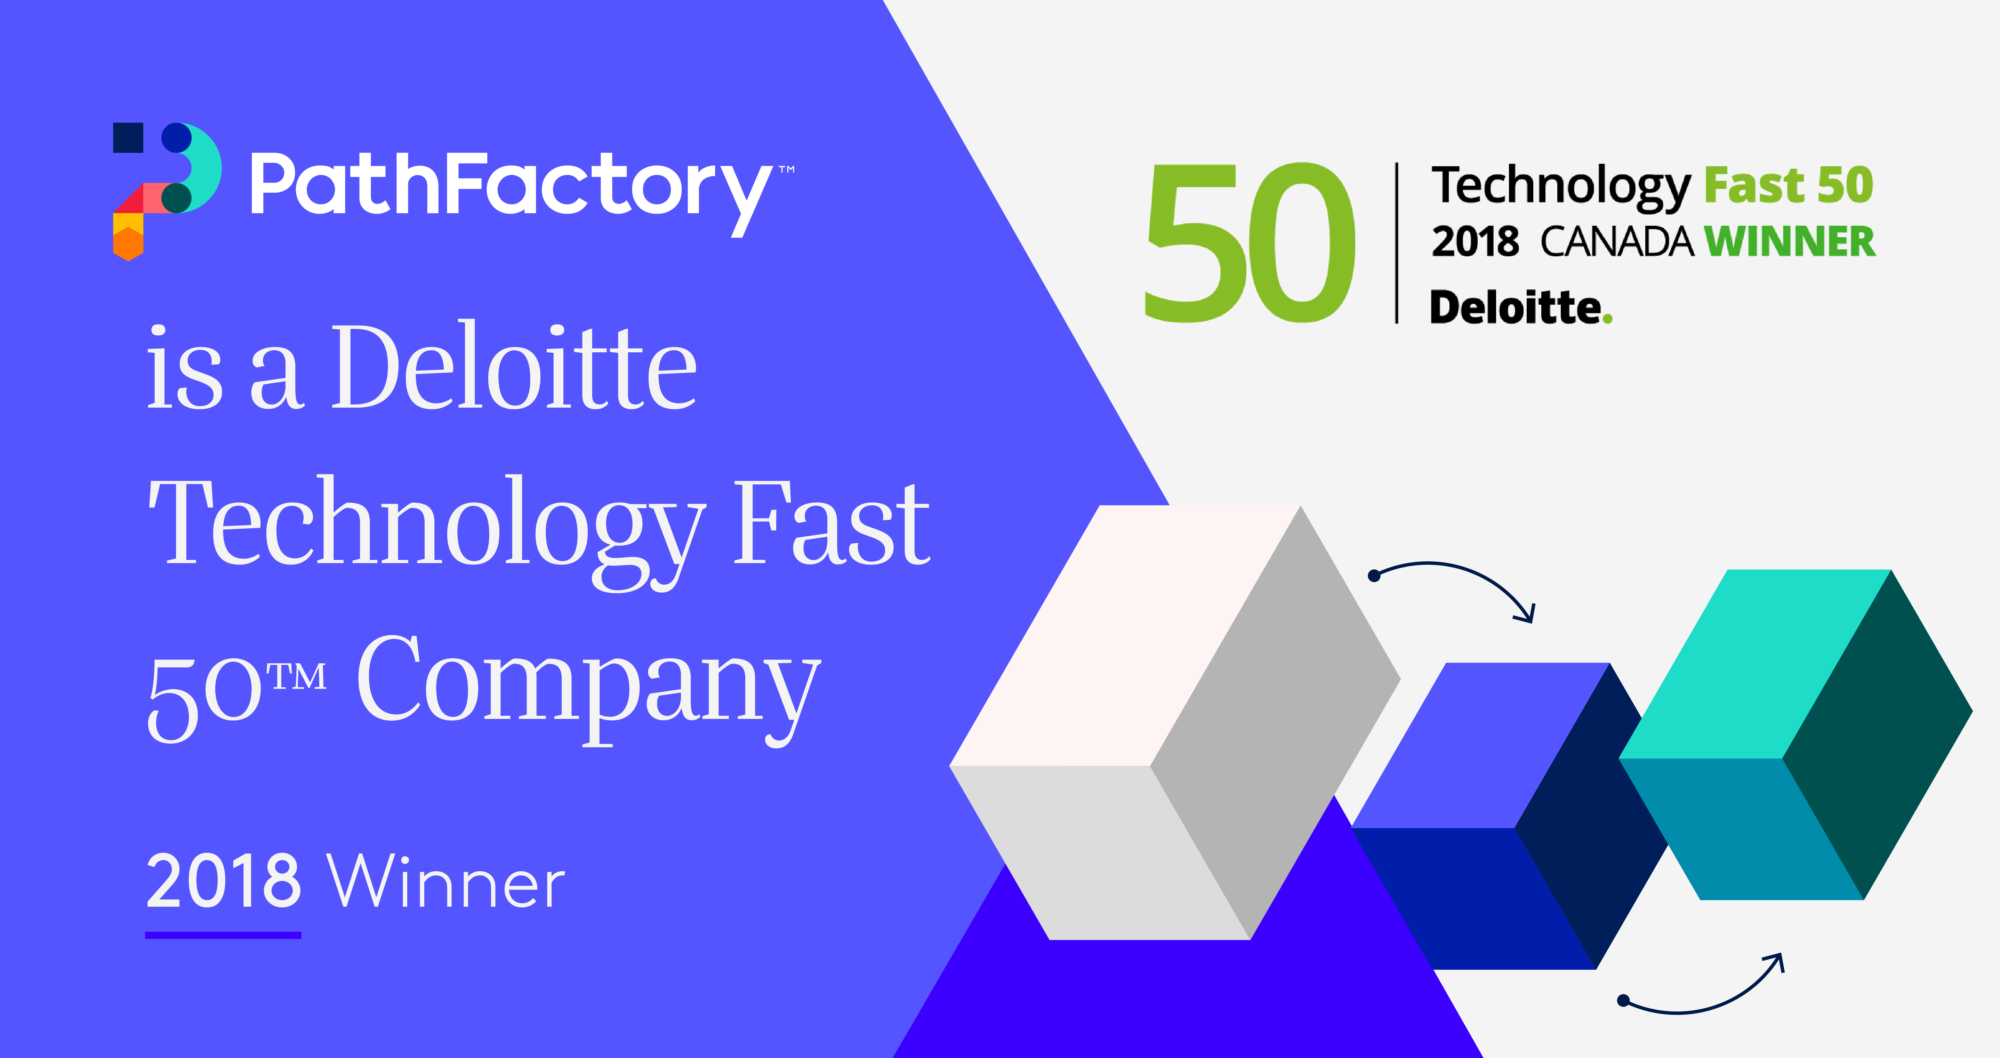 Decorative blocks on blue and beige background with PathFactory logo in upper left and title below "is a deloitte technology fast 50 company"